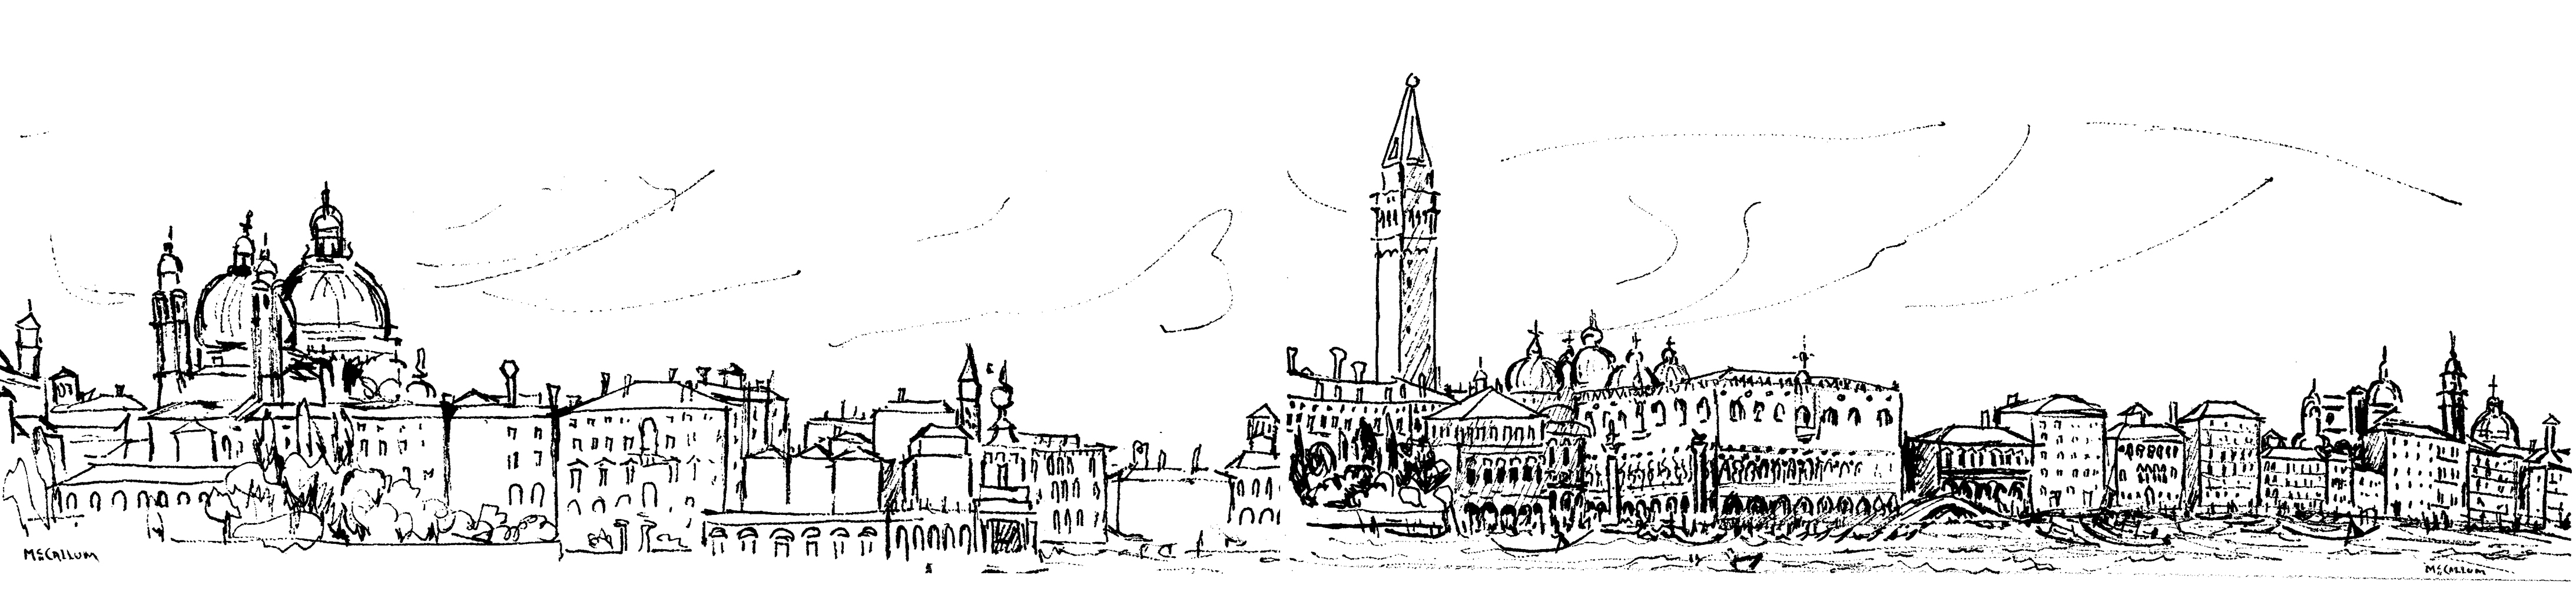 A circa-1968 sketch with note, “Looking across at Venice from a balcony on Giudecca Island” from A Travel Sketchbook, published in 1971